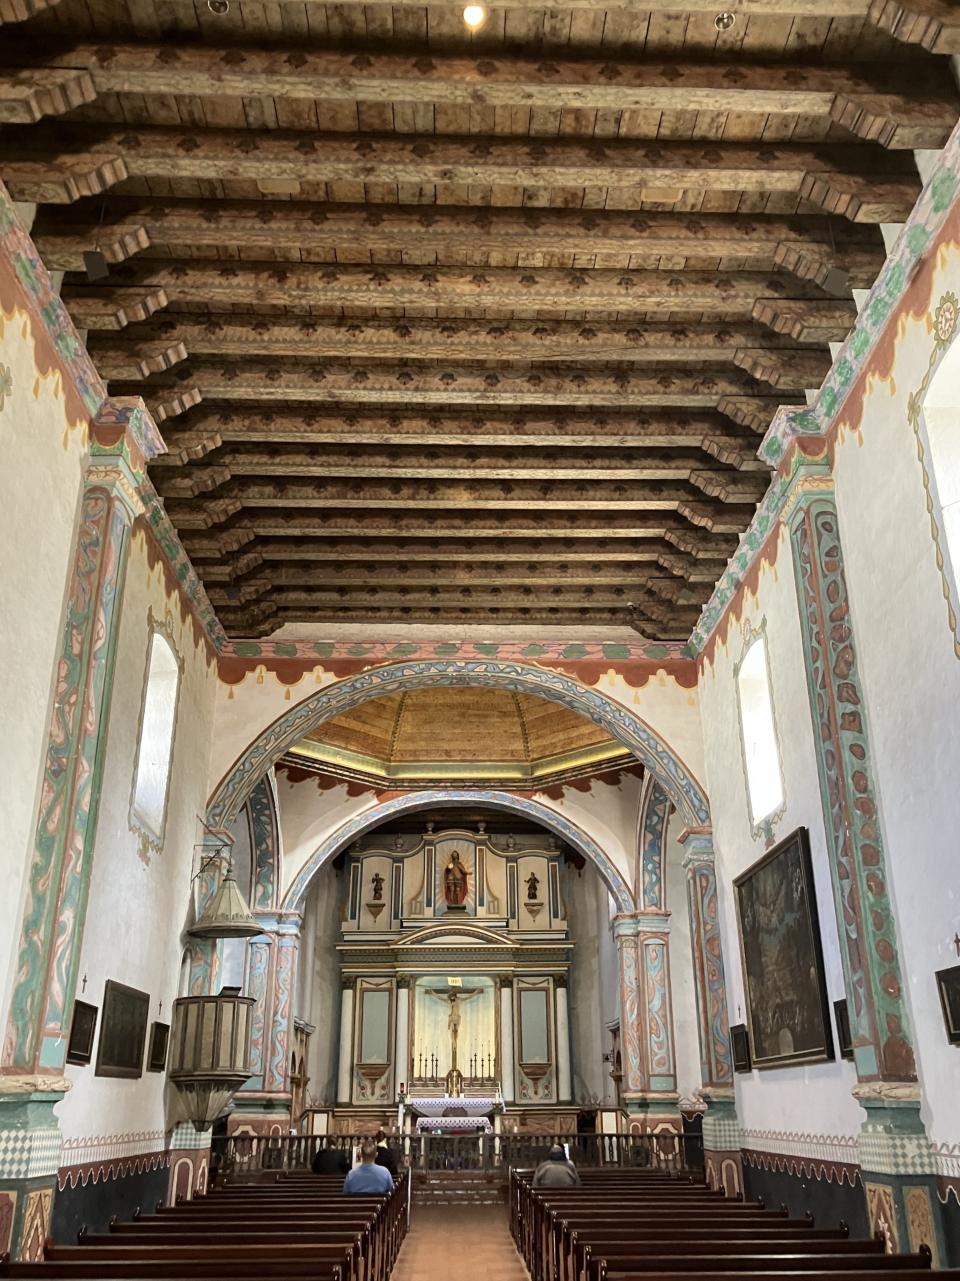 In Oceanside, Calif., Mission San Luis Rey, dating to 1798, is laid out in a cross-shaped design. The altar reflects a mix of classical and baroque architecture.